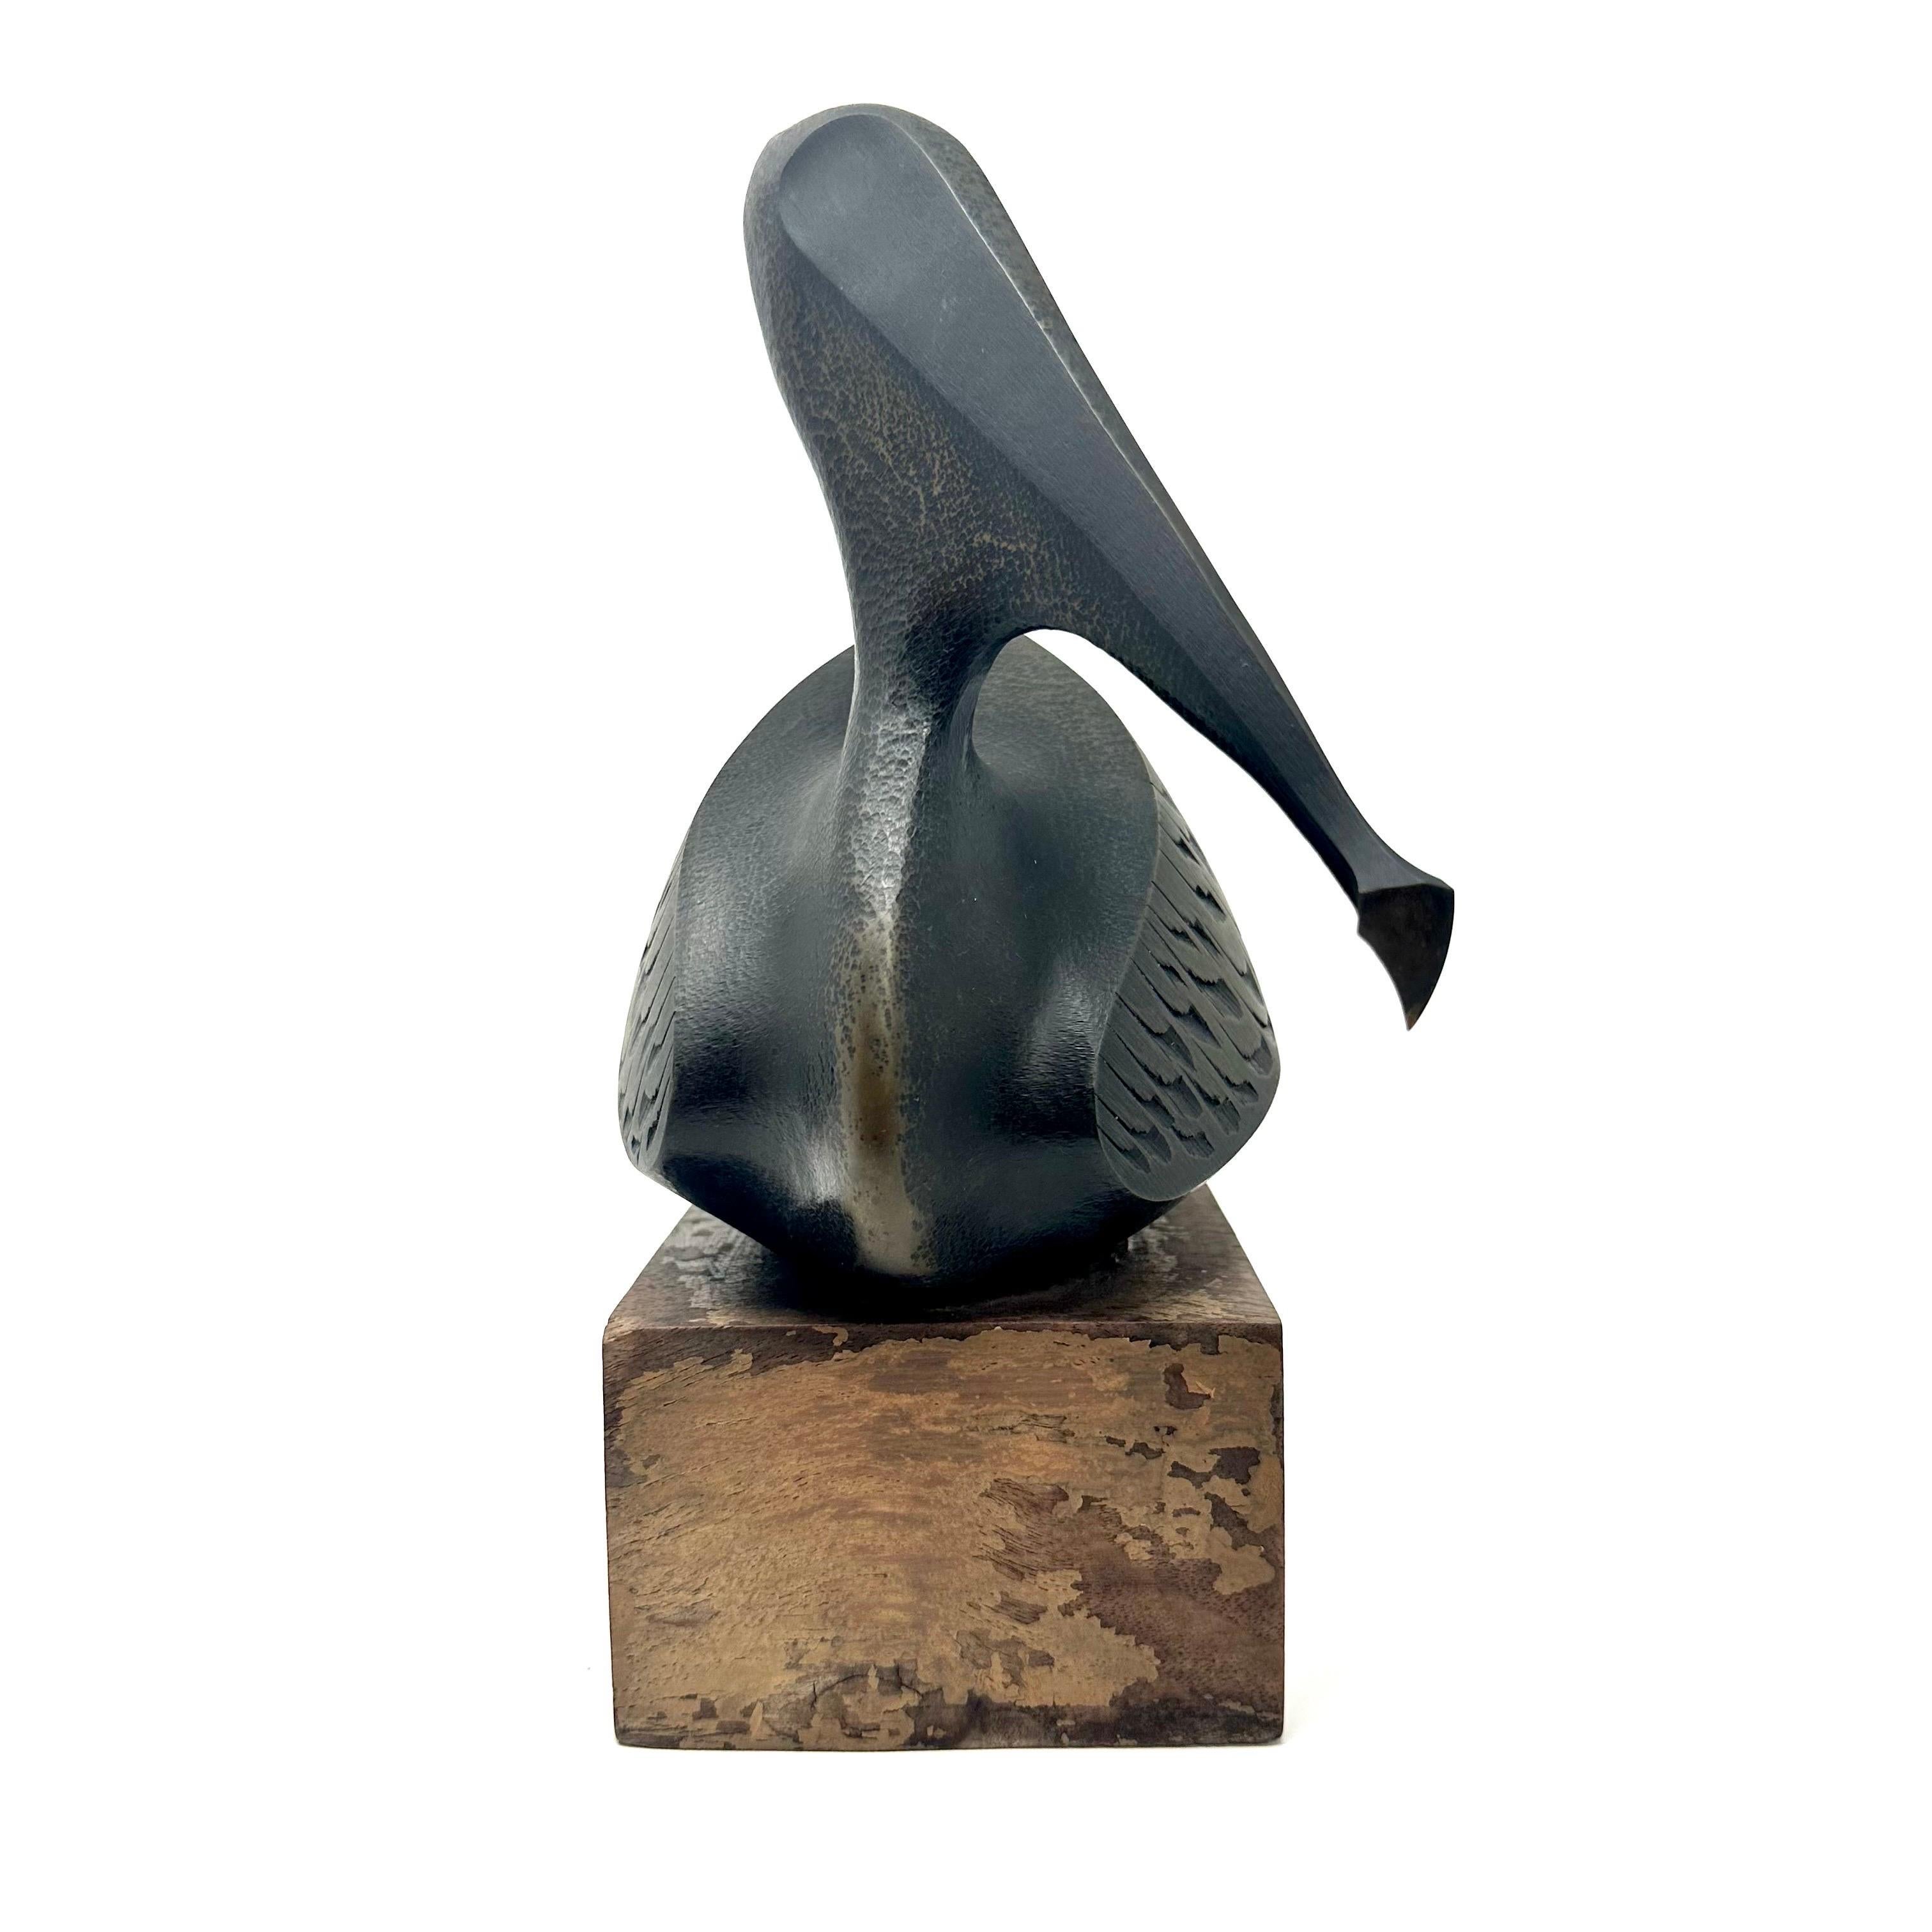 Late 20th century cast bronze pelican sculpture on wood base by California artist Douglas Purdy. The piece is marked on the underside of the base, and numbered 80/200. The sculpture depicts an abstracted pelican, and is in excellent